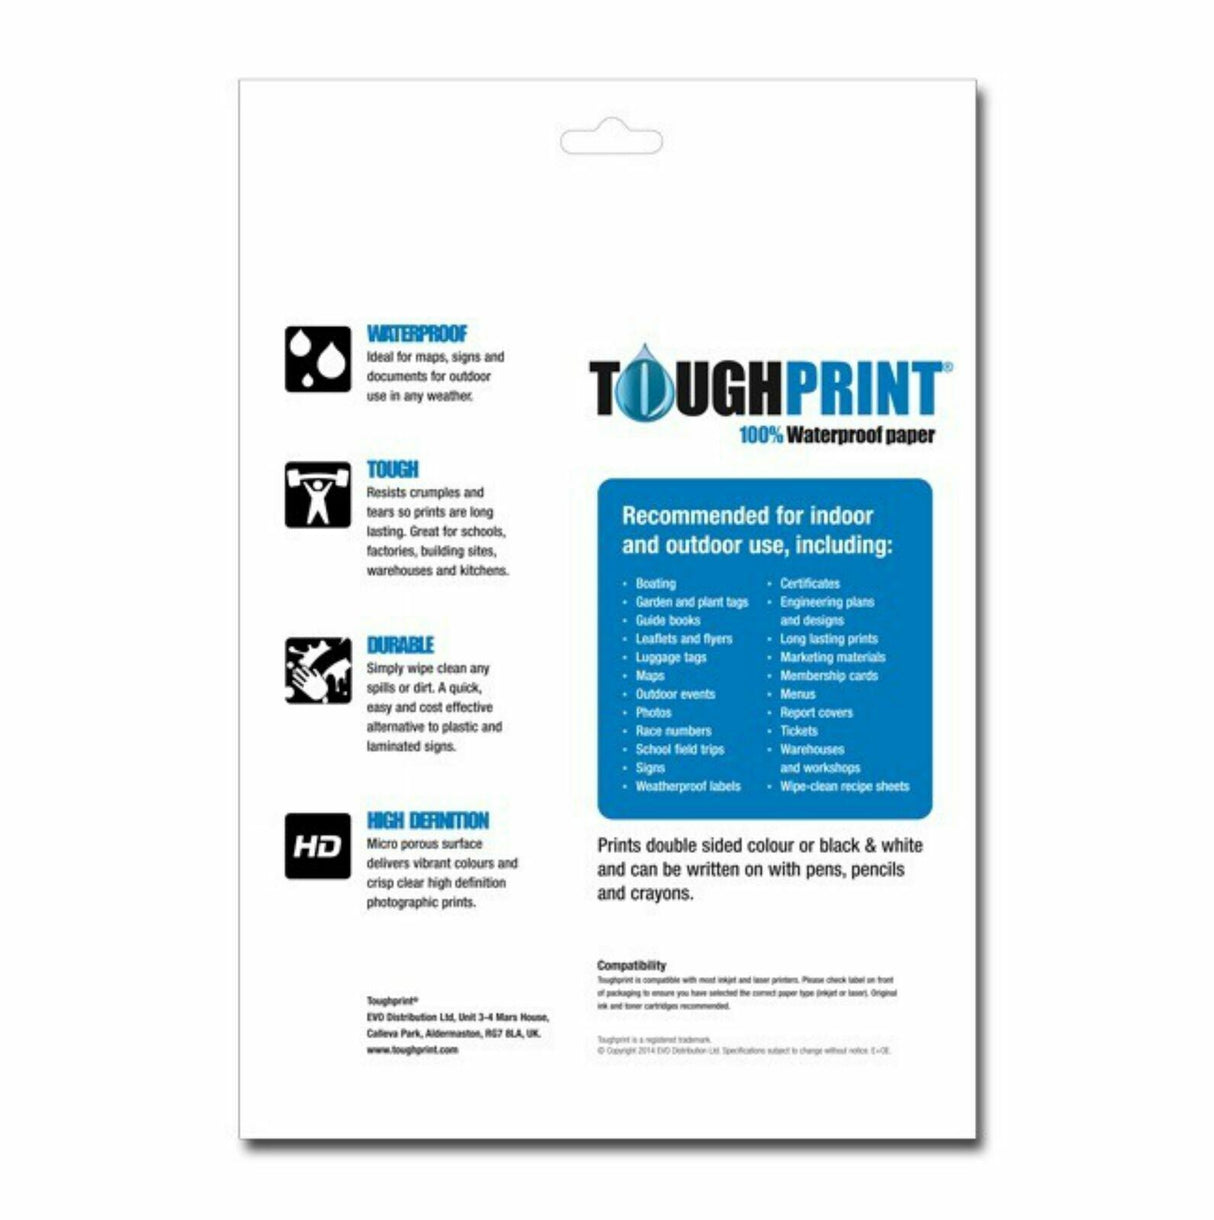 ToughPrint Waterproof Inkjet A4 Paper, Use for Maps, Signs & Documents - 25 Sheets - PROTEUS MARINE STORE